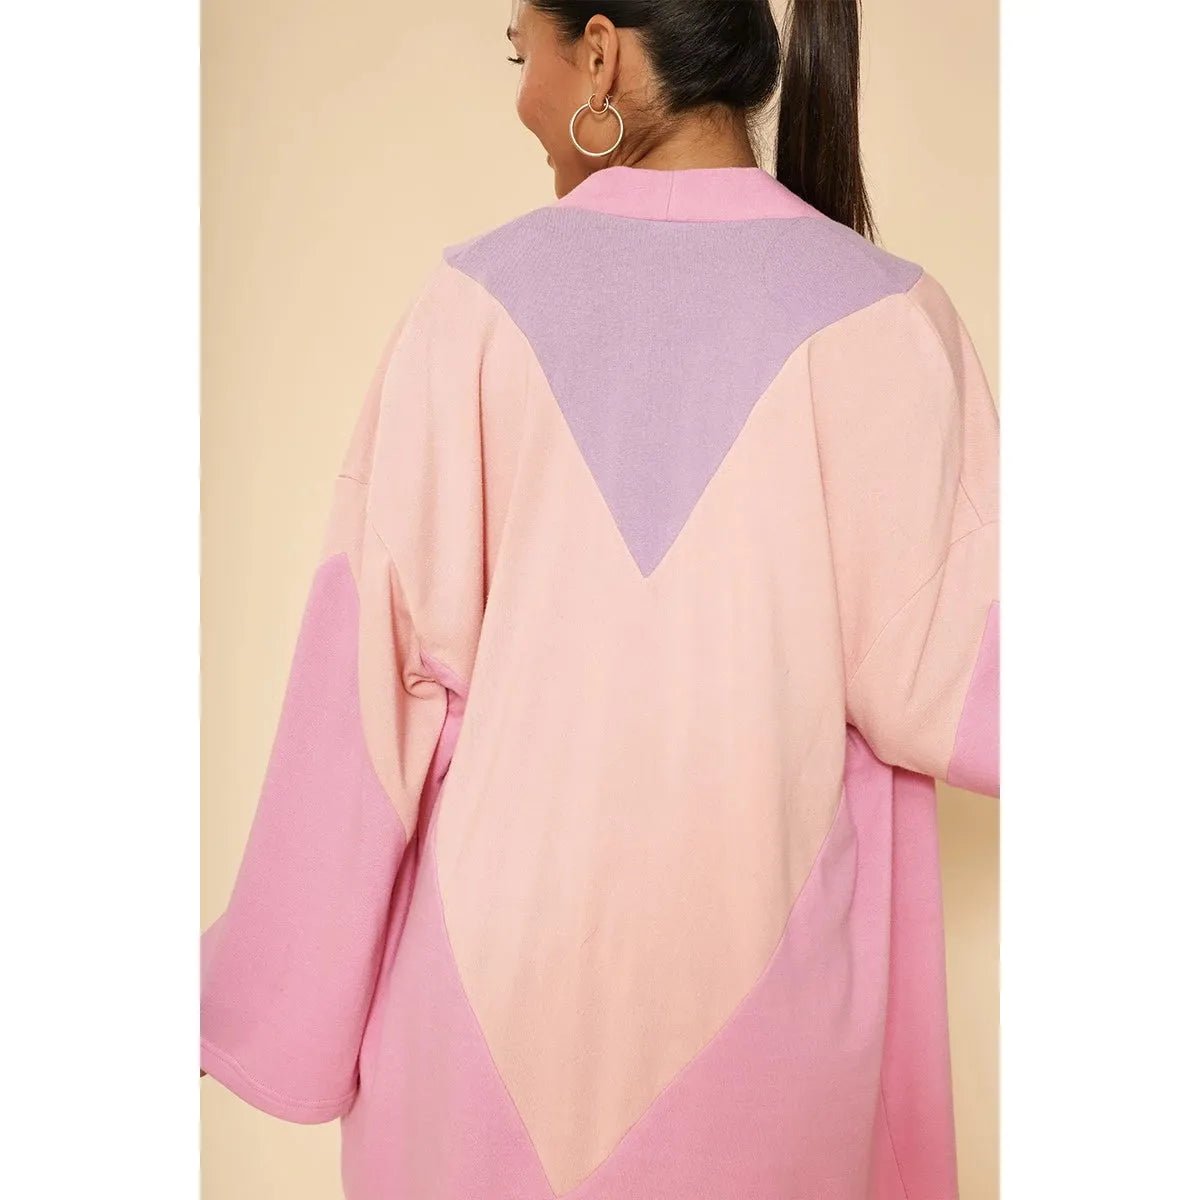 Chevron Terry Cloth Novelty Robe - Miles and Bishop